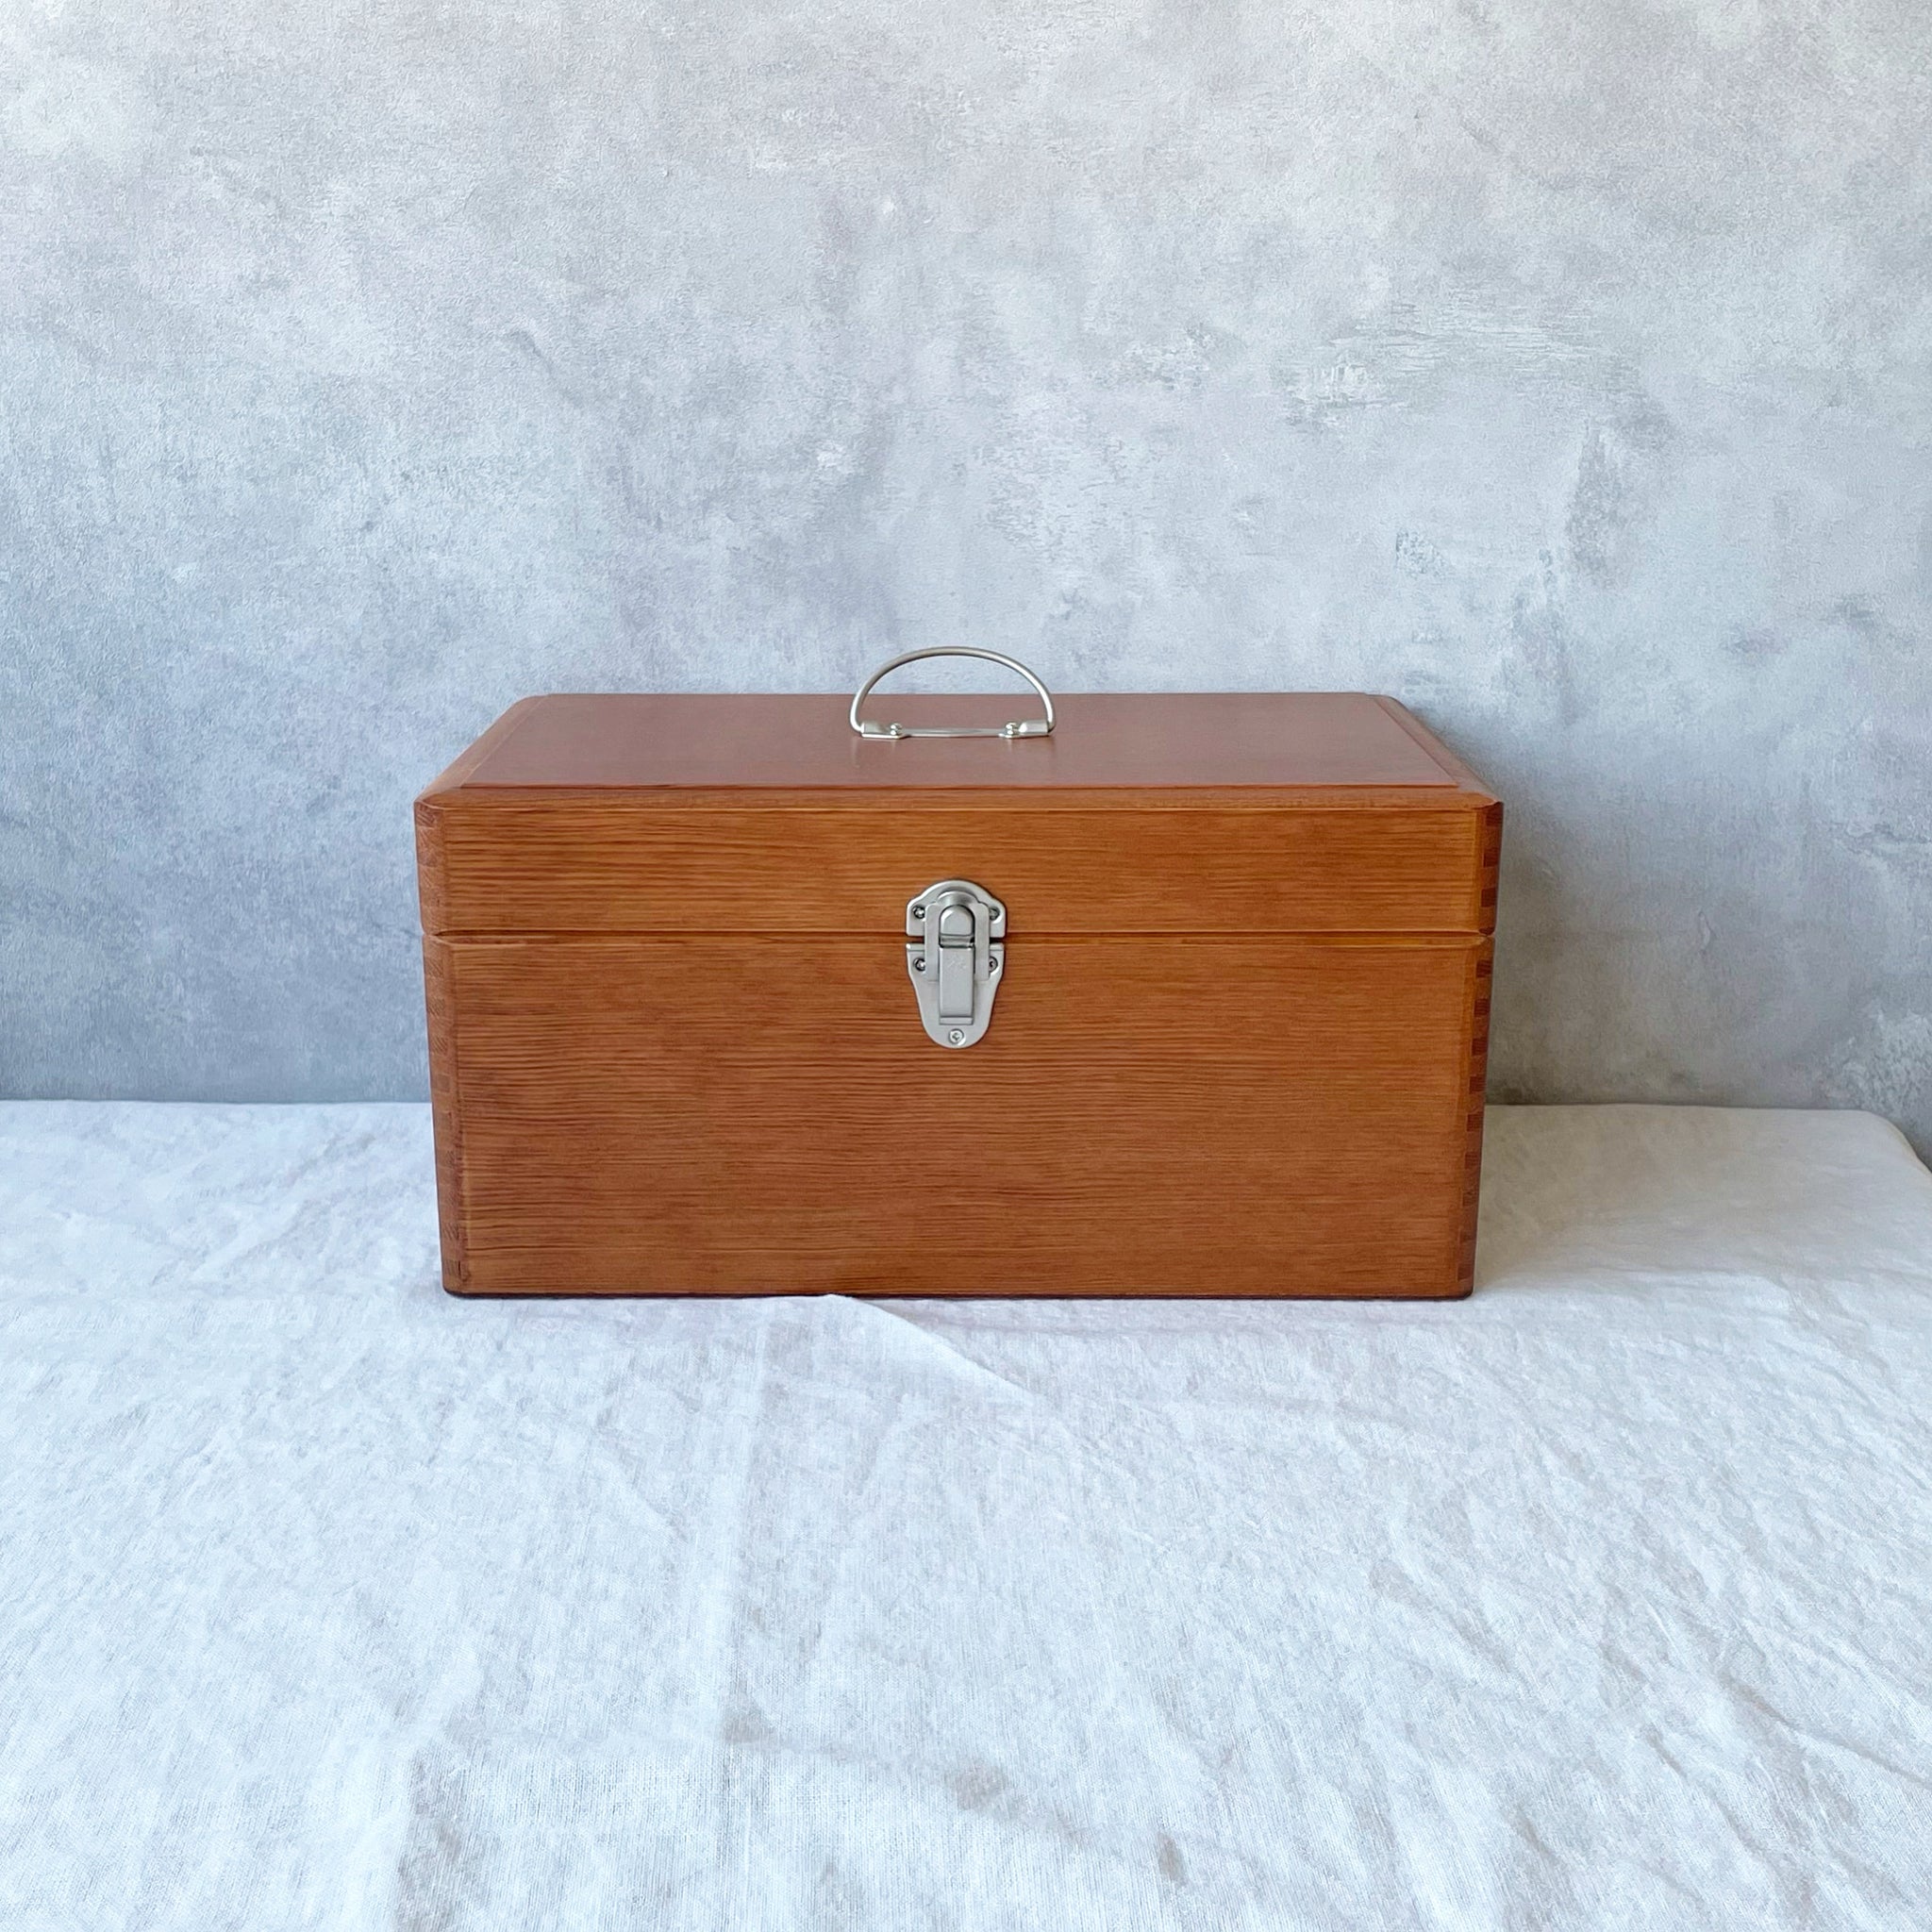 Classiky - First Aid Kit / Wood Tool boxes in 3 sizes - Hands On Workshop